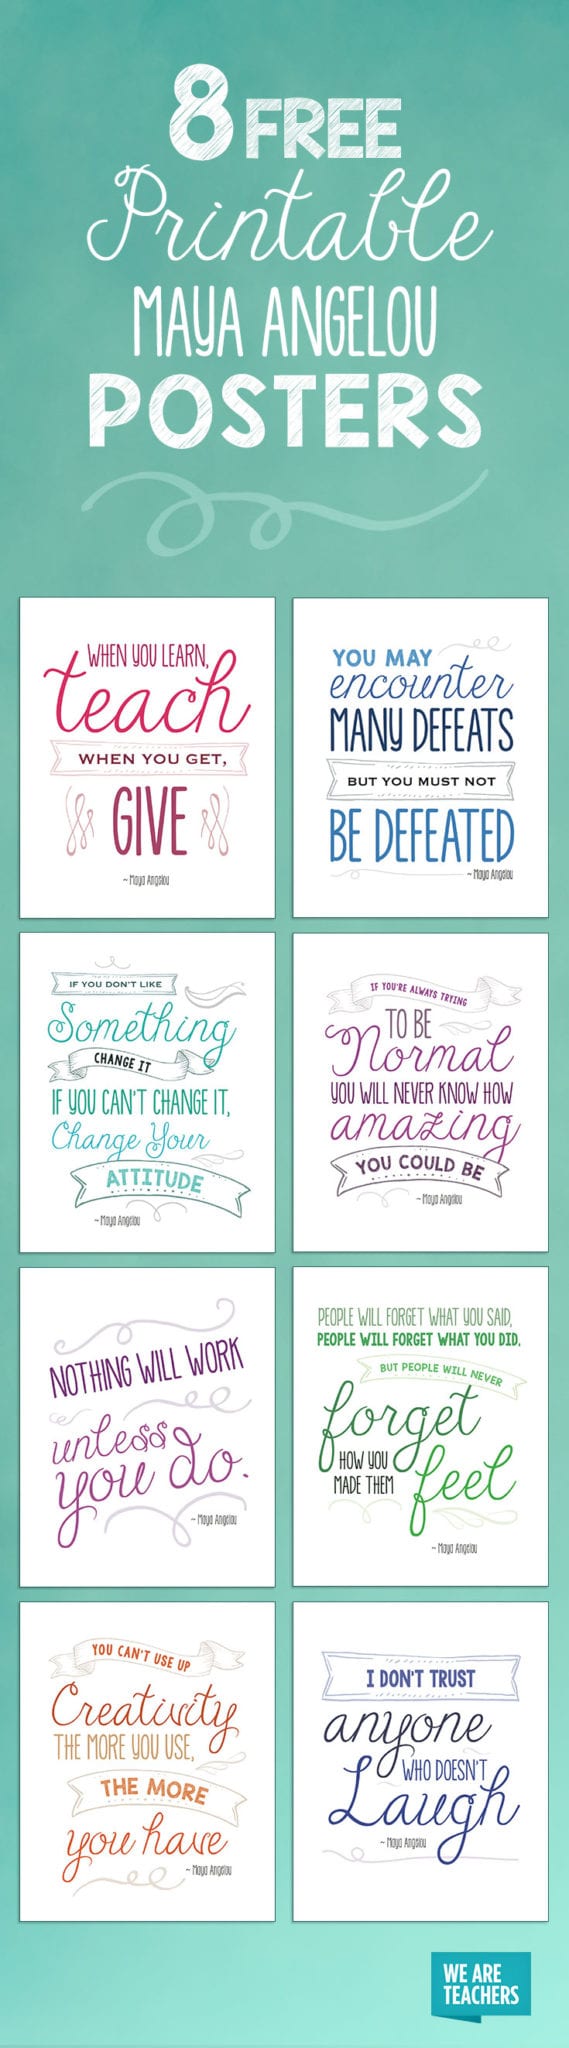 Maya Angelou Education Quotes 8 Free Printable Posters